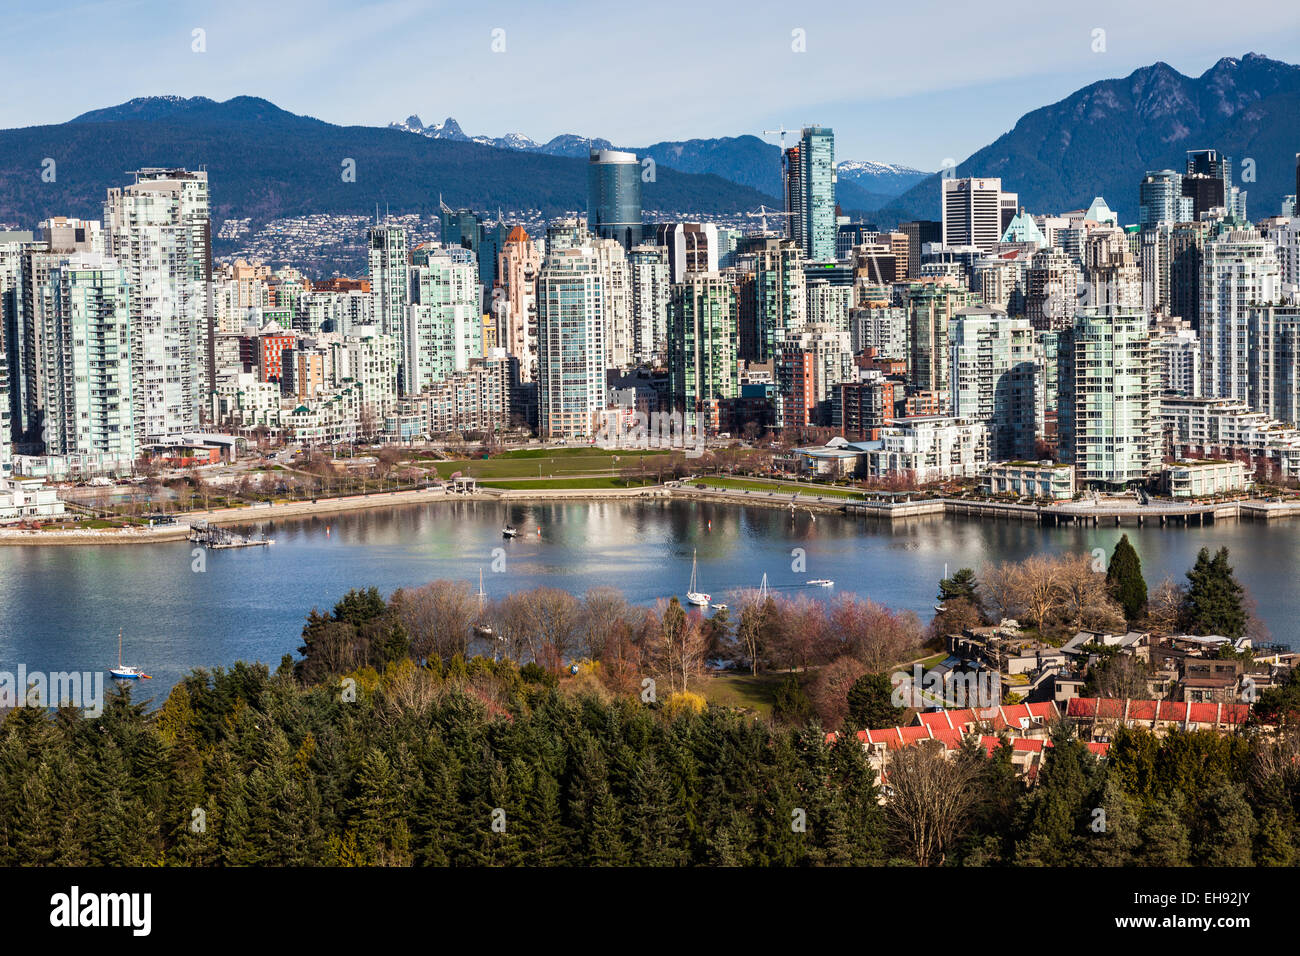 View of the Yaletown district of Vancouver, Canada Stock Photo